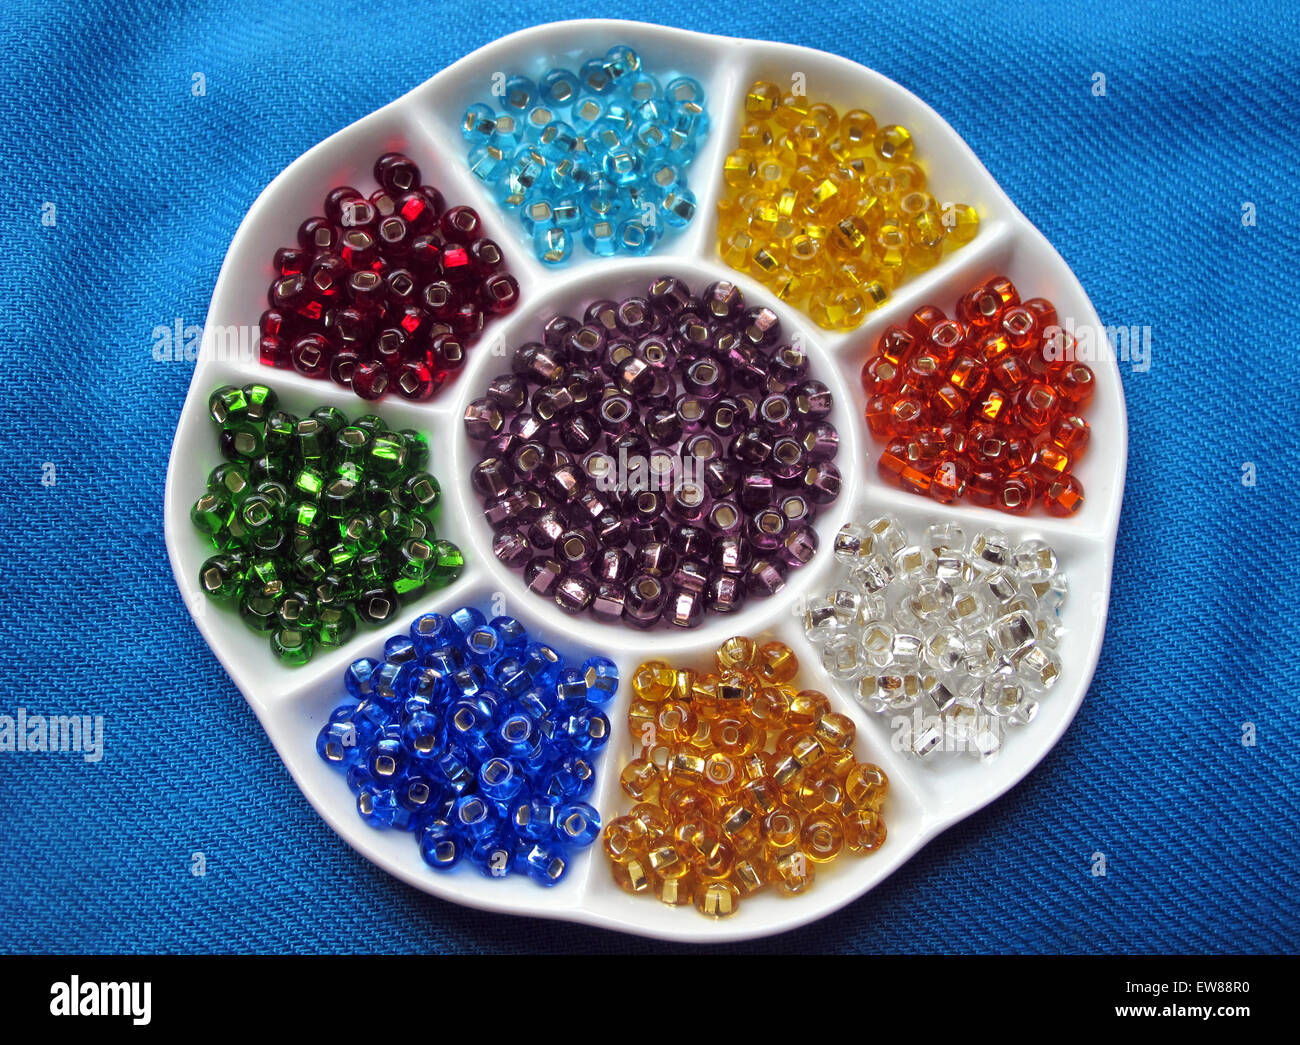 Colorful glass beads in a ceramic bead sorter. Stock Photo